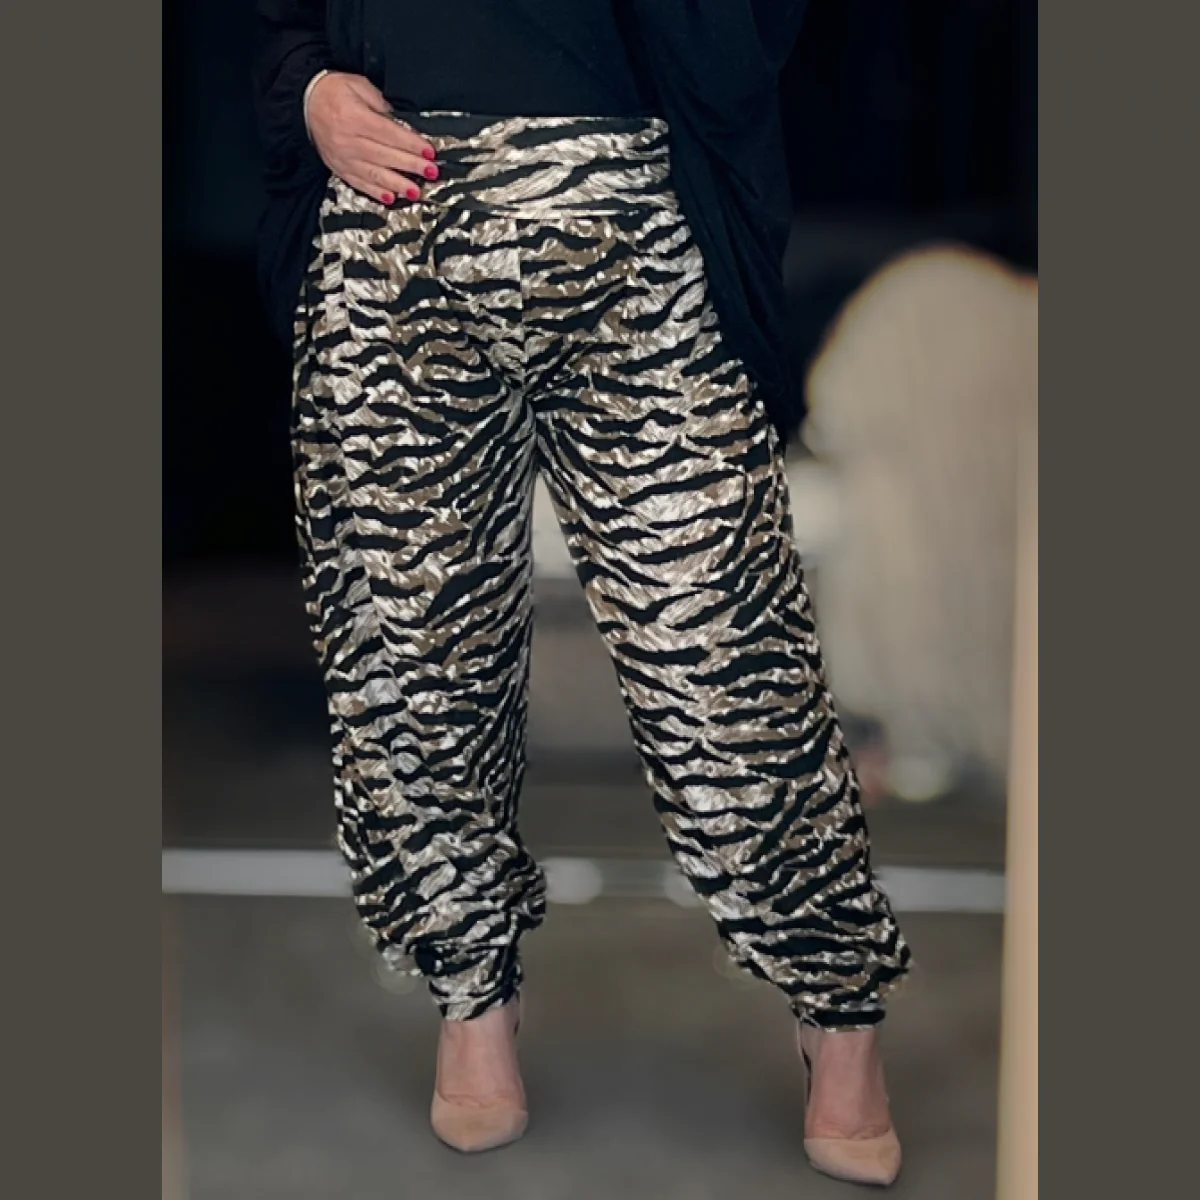 TİGERS TİGERSS women's seasonal tracksuit bottoms with pockets and elastic  waist and leg hems